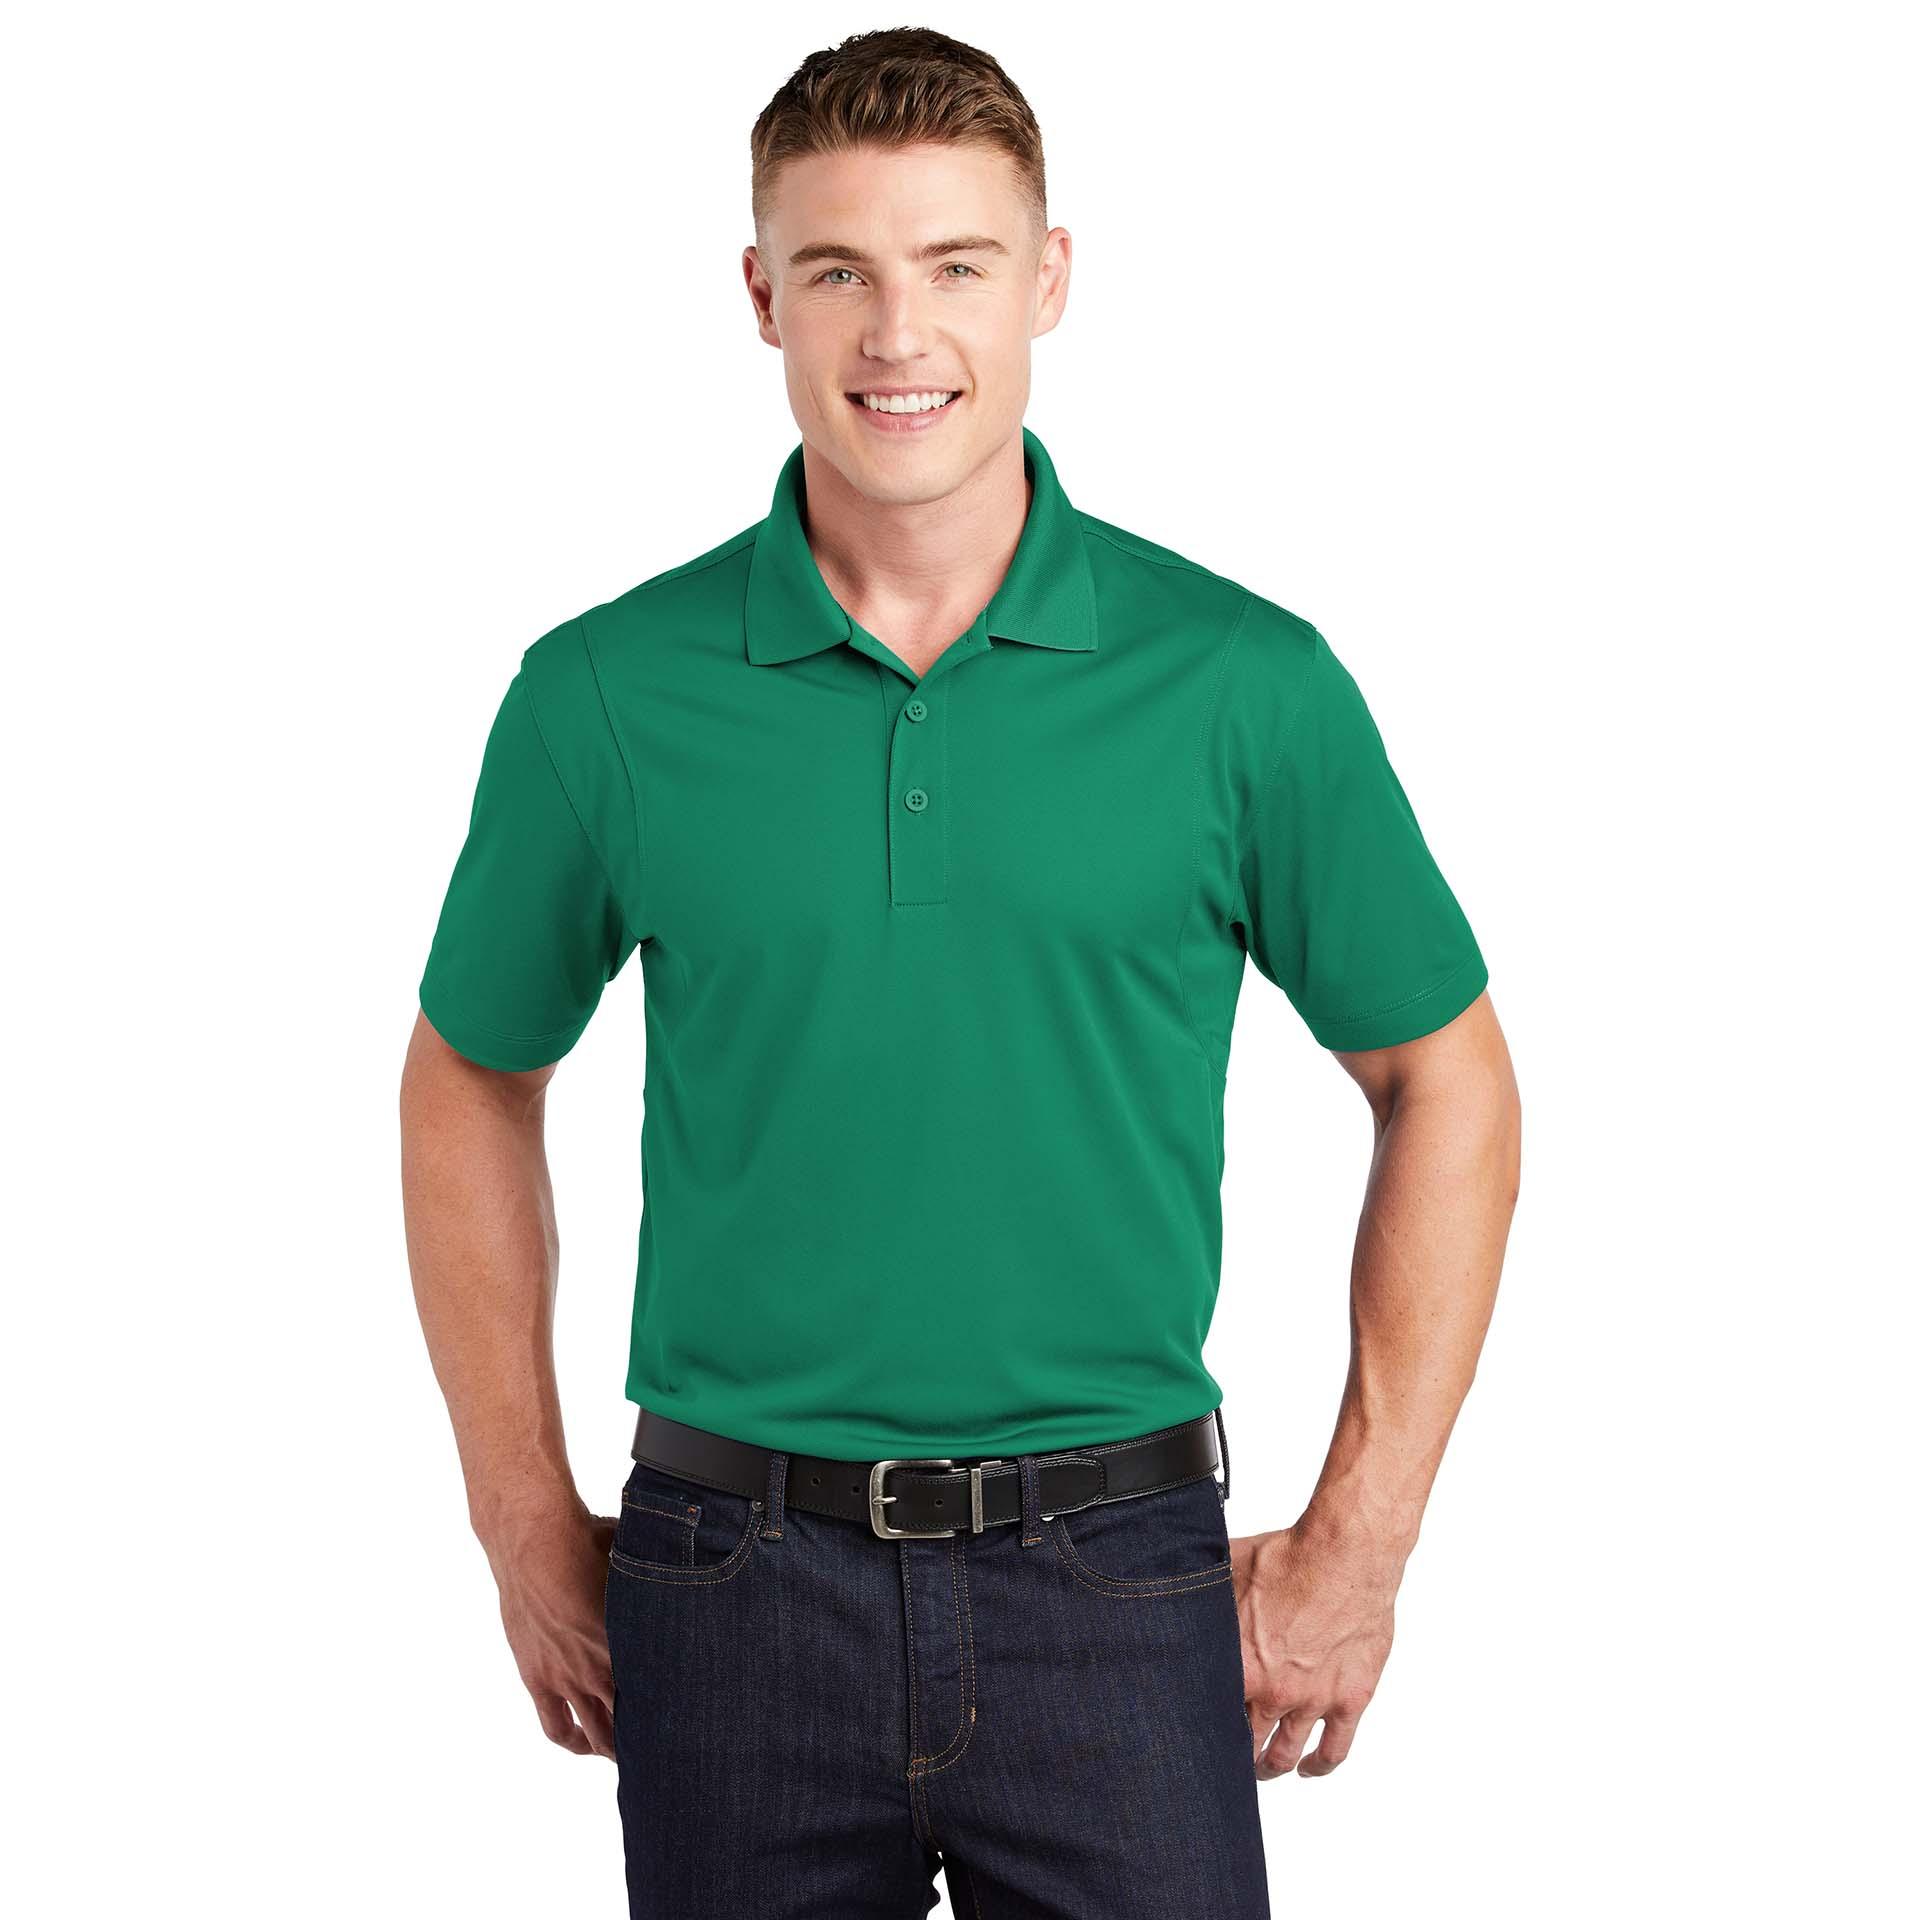 George Men's Pique Polo Shirt with Long Sleeves, Sizes S-3xl, Size: Large, Green